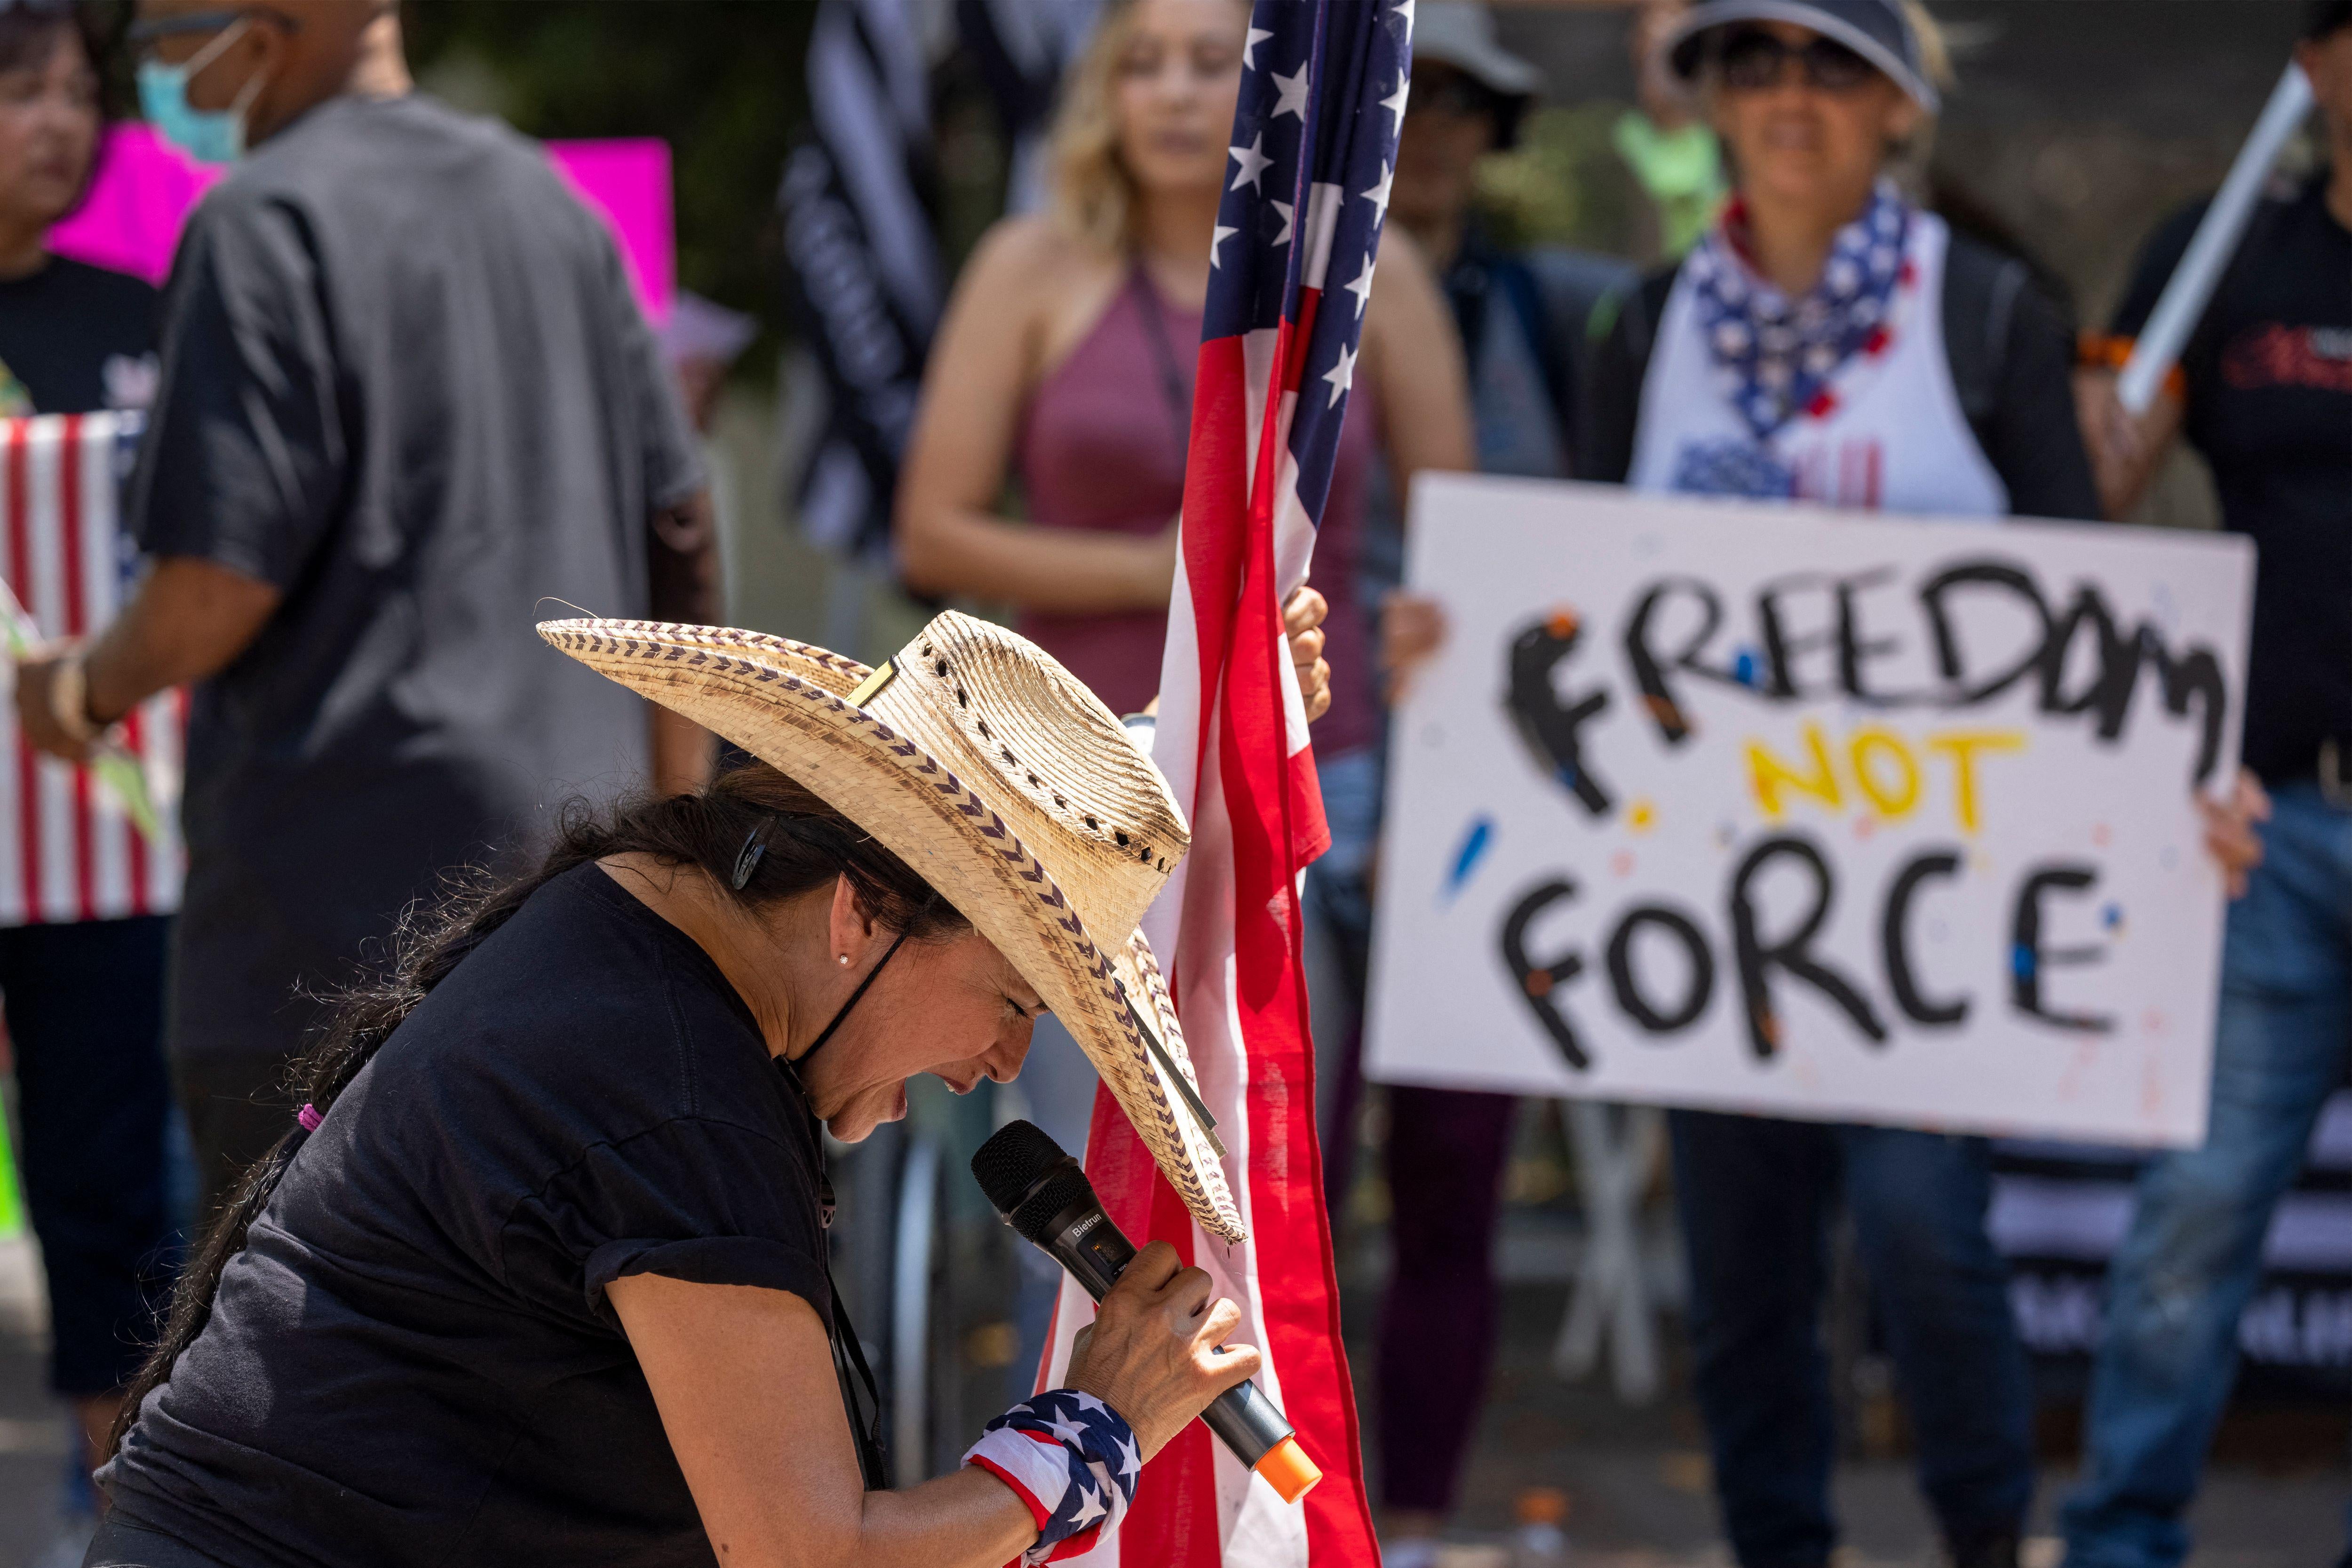 A woman in a cowboy hat and leans forward toward a microphone she's holding. With the other hand, she holds an American flag. In the background, a person holds a sign saying "Freedom not Force." 